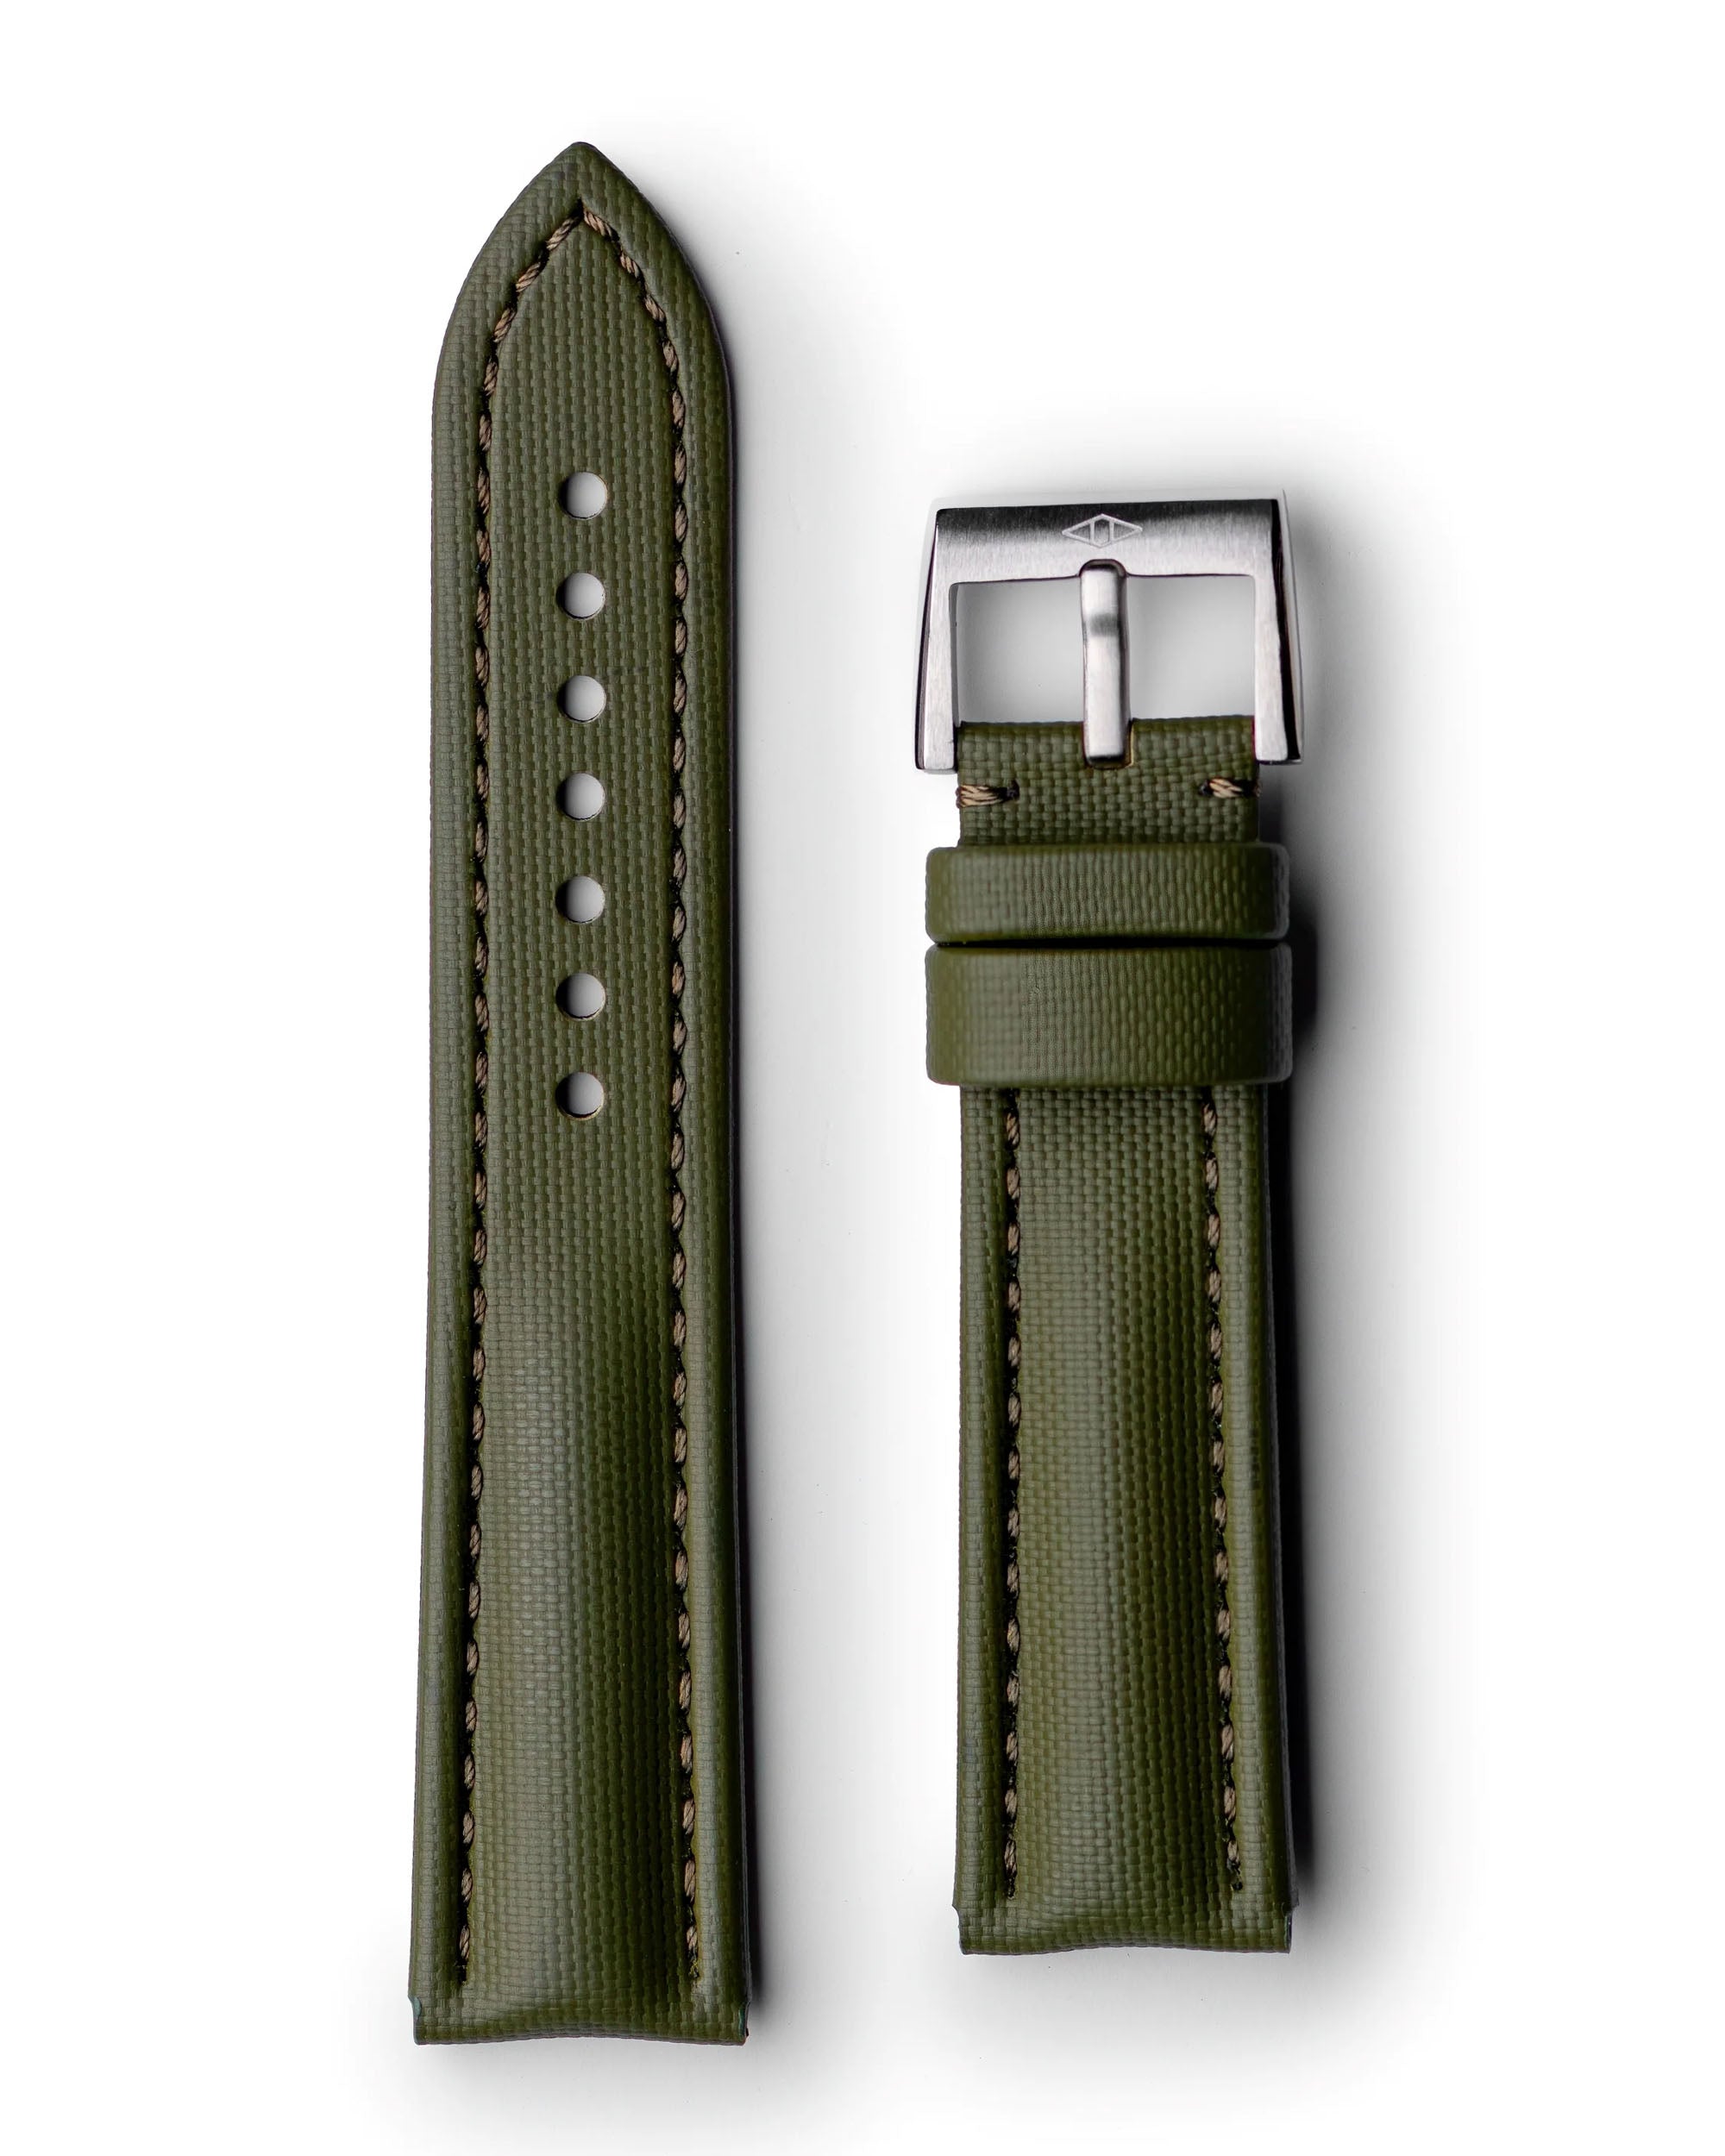 Artem Classic Sailcloth With Quick Release - Khaki Green With Green Stitching